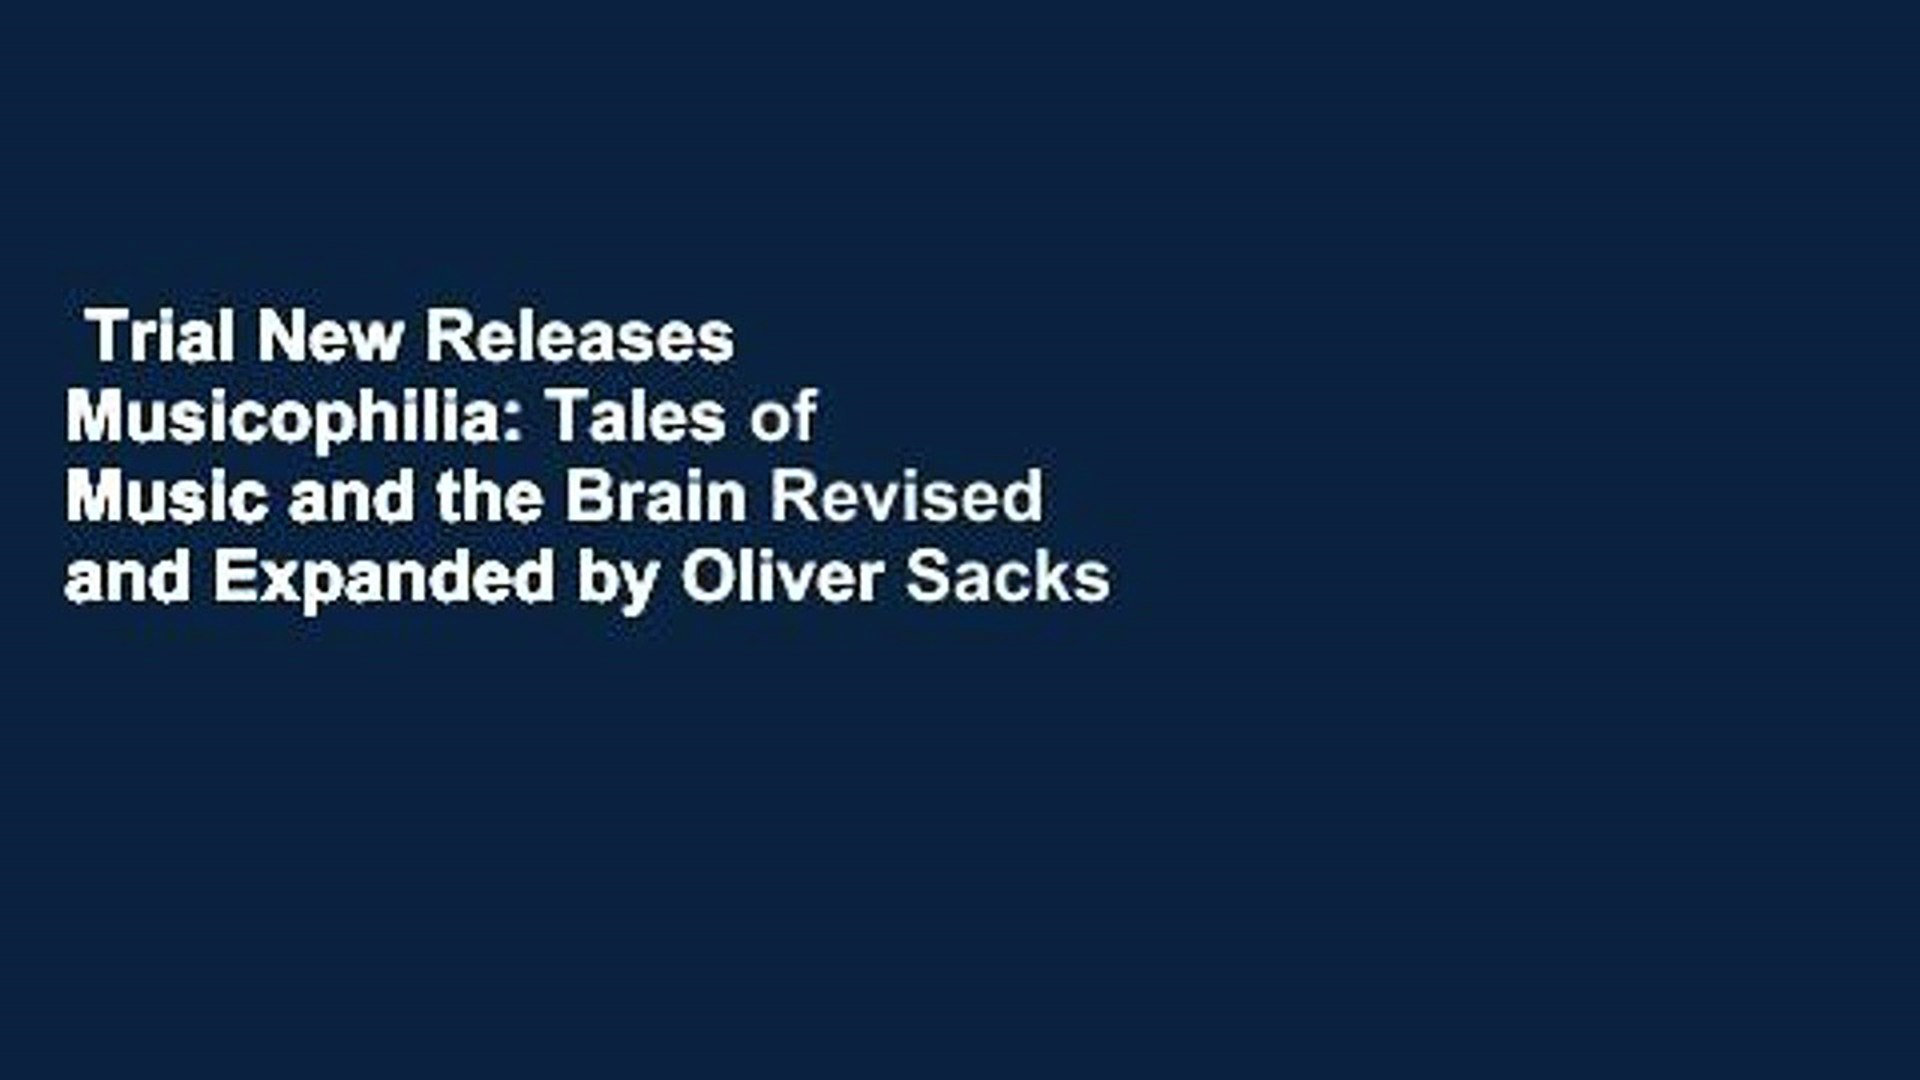 Download Book Musicophilia tales of music and the brain No Survey